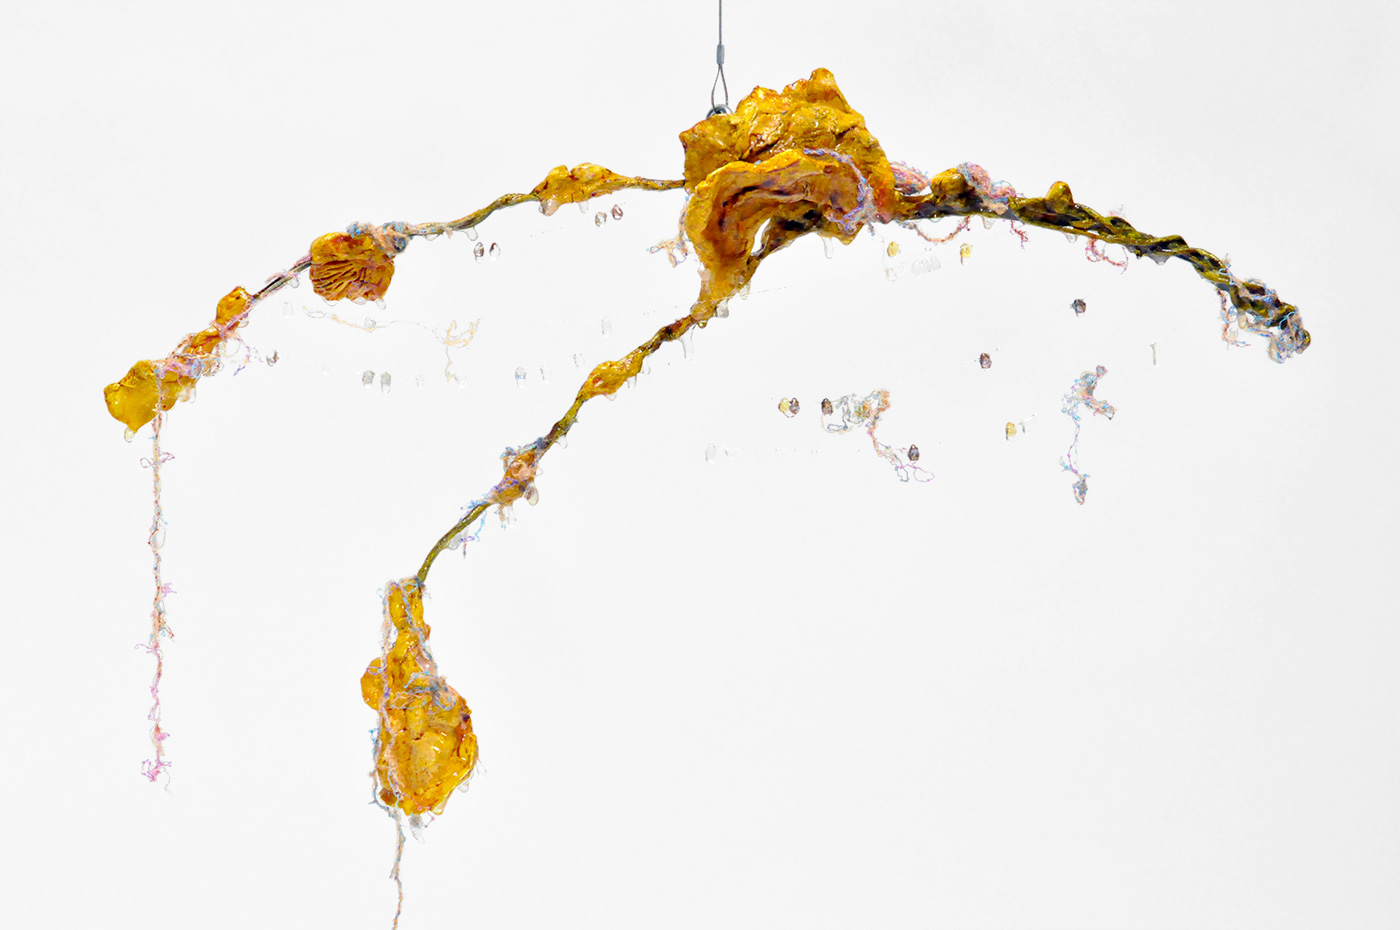 Branch [#SS21SC002] 2021, Oil, Glue, Resin, Yarn, Nylon Wire, Glass Beads, and Stone Powder Clay on Steel Wire, 13 x 20 x 2.5 in. / 32 x 50 x 6 cm